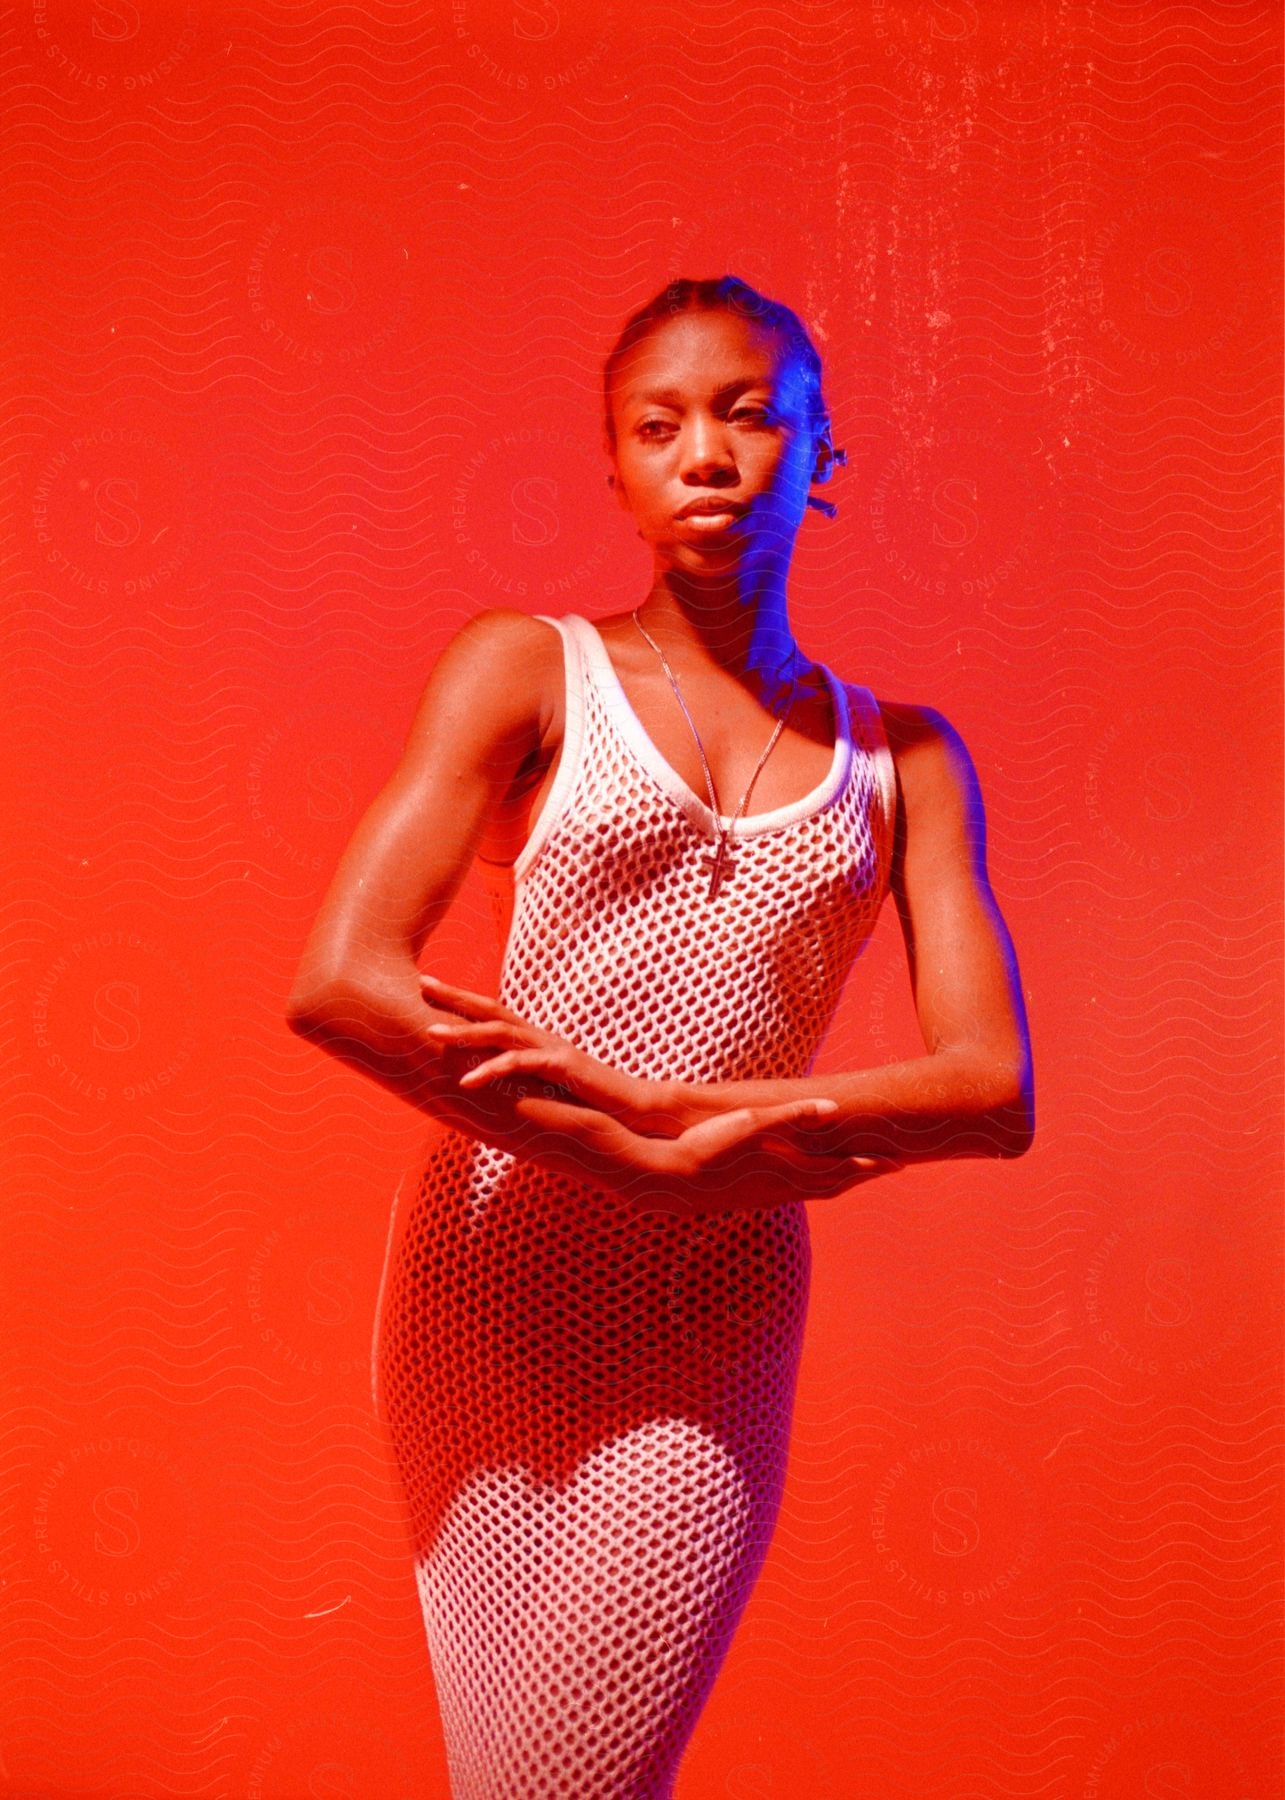 Woman posing against a red background in a long white dress.